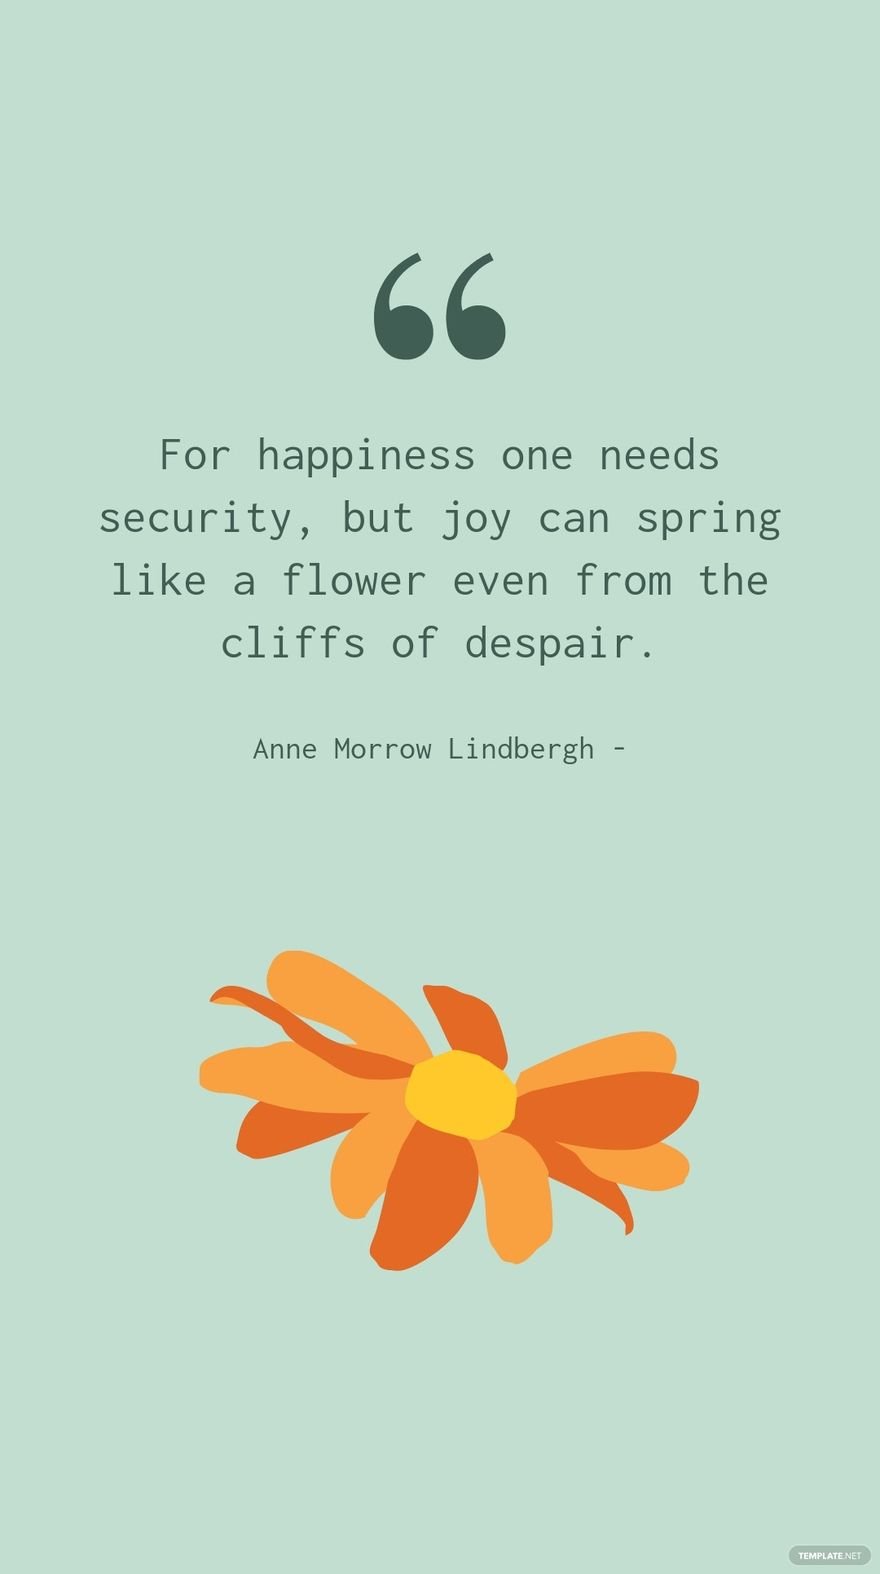 Free Anne Morrow Lindbergh - For happiness one needs security, but joy can spring like a flower even from the cliffs of despair.